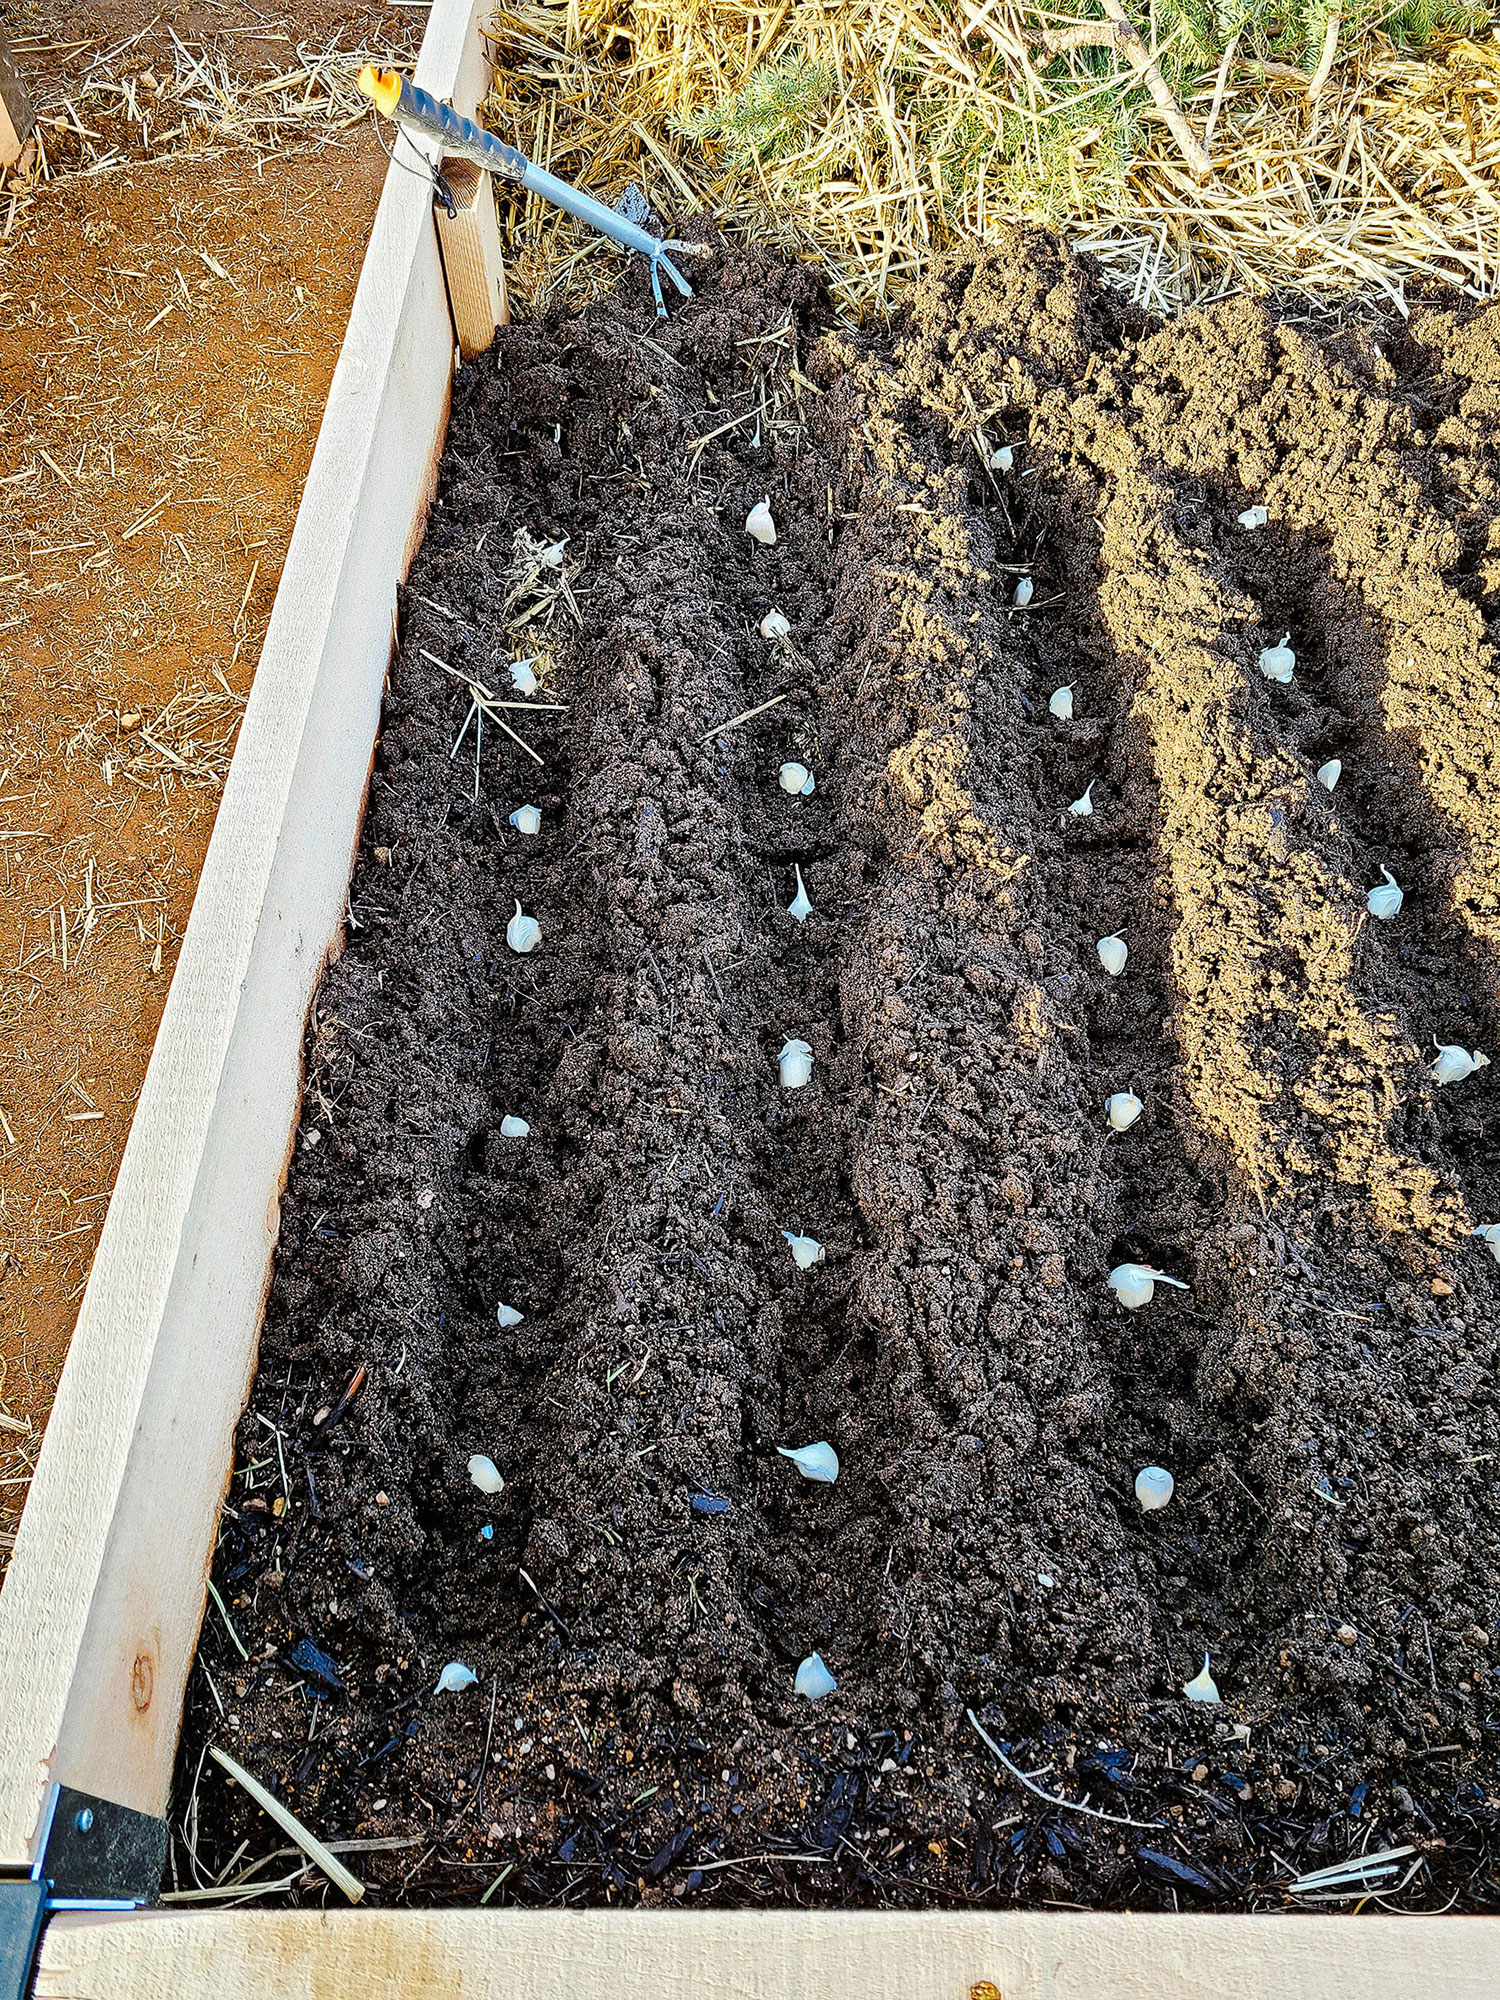 Garlic cloves planted in rows in a raised bed